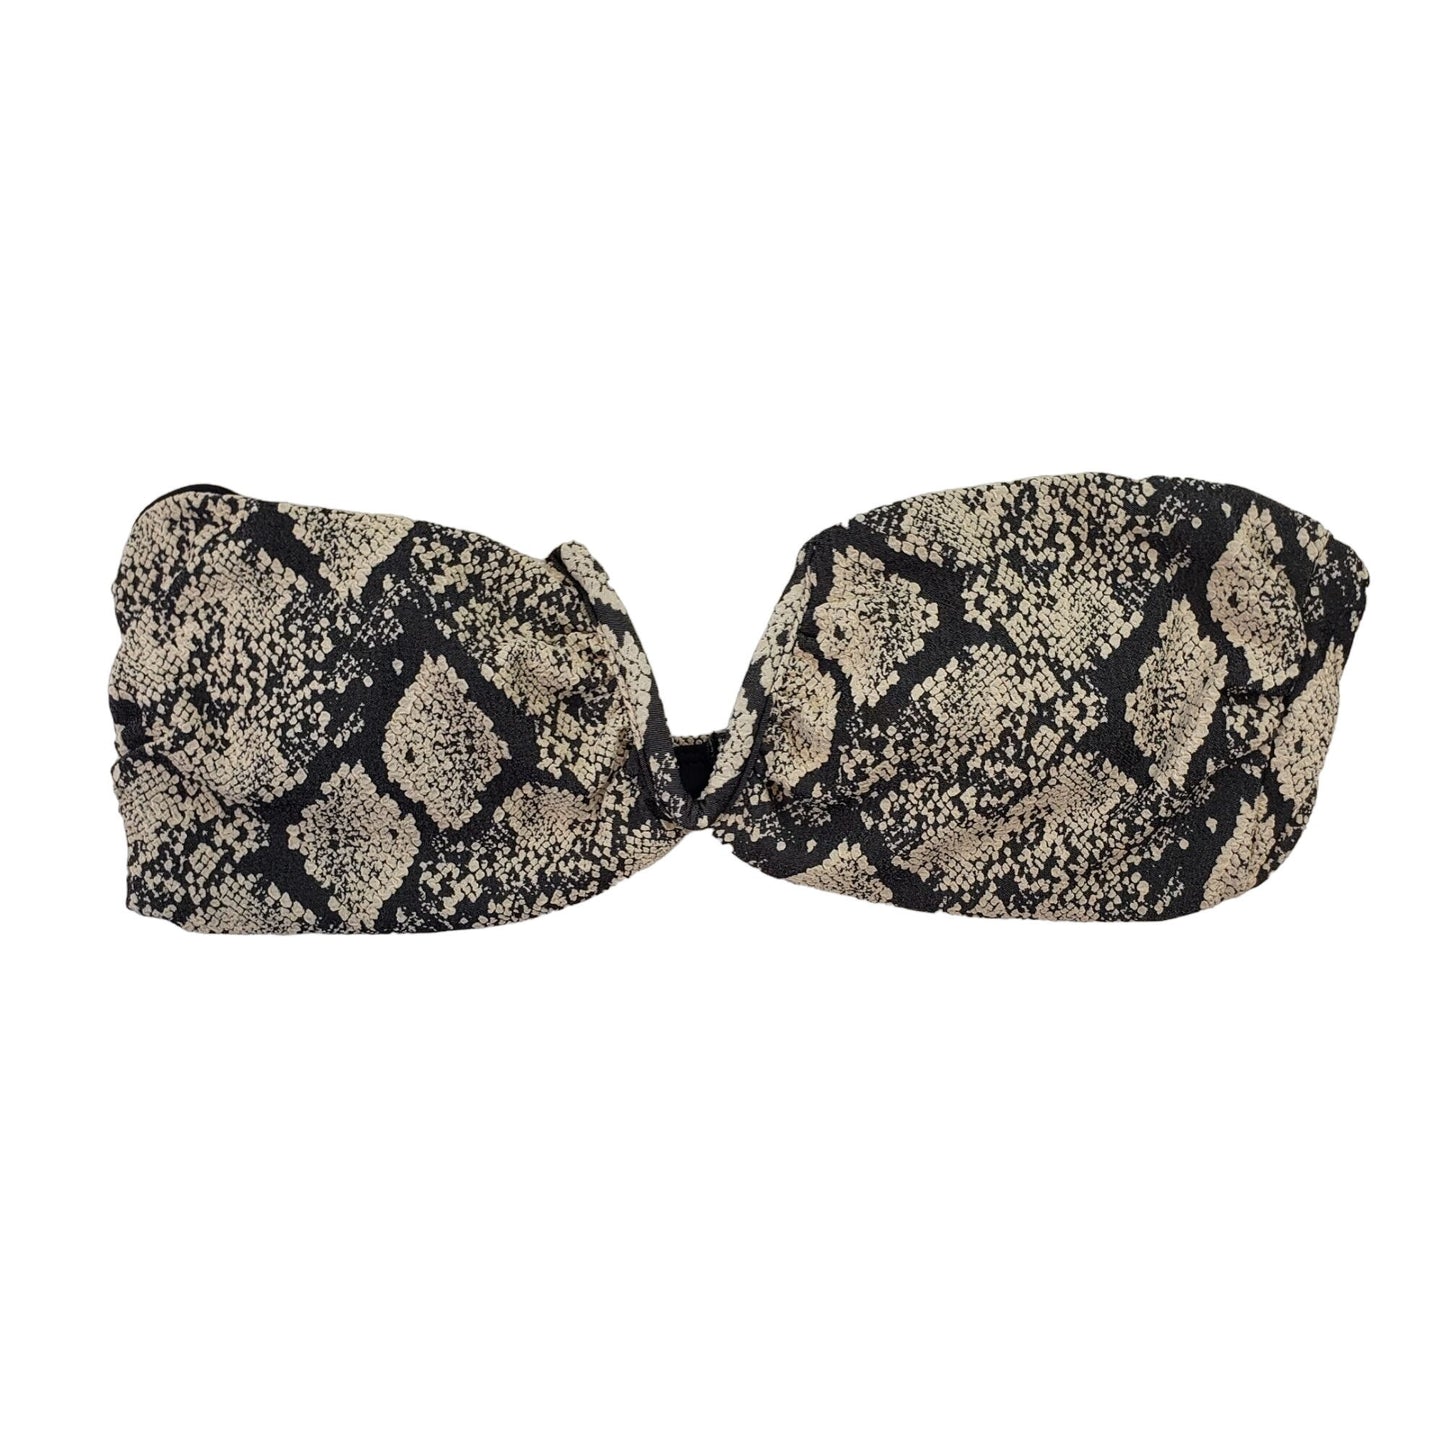 NWT Andie The Scala Padded Bandeau Bikini Top in Snakeskin Size Small